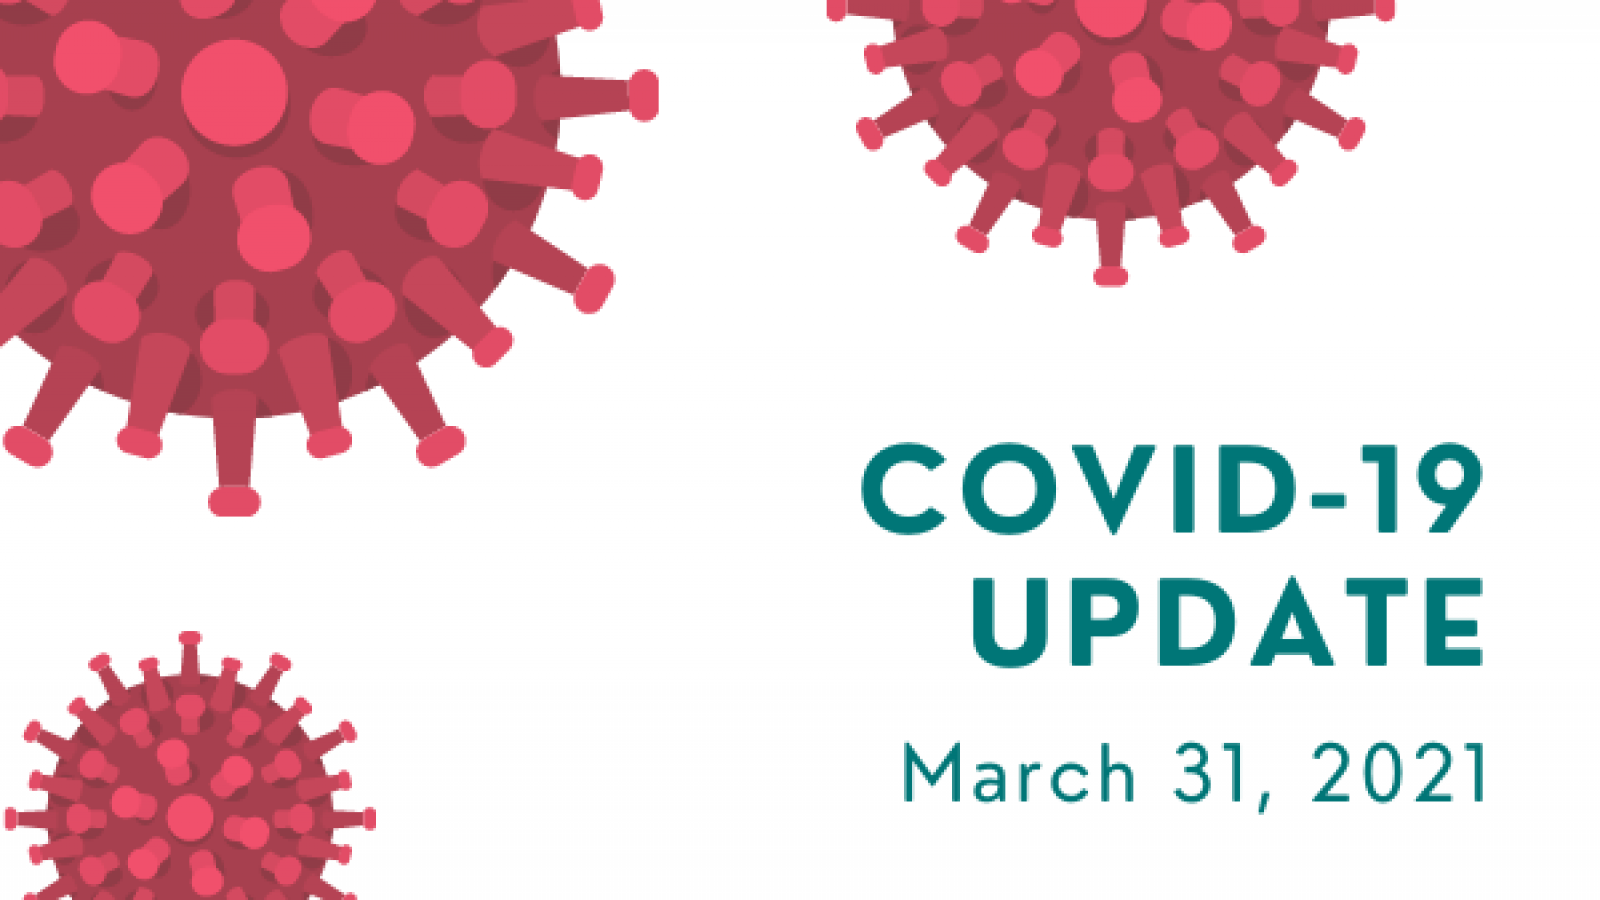 Musqueam's COVID-19 Update for March 31, 2021